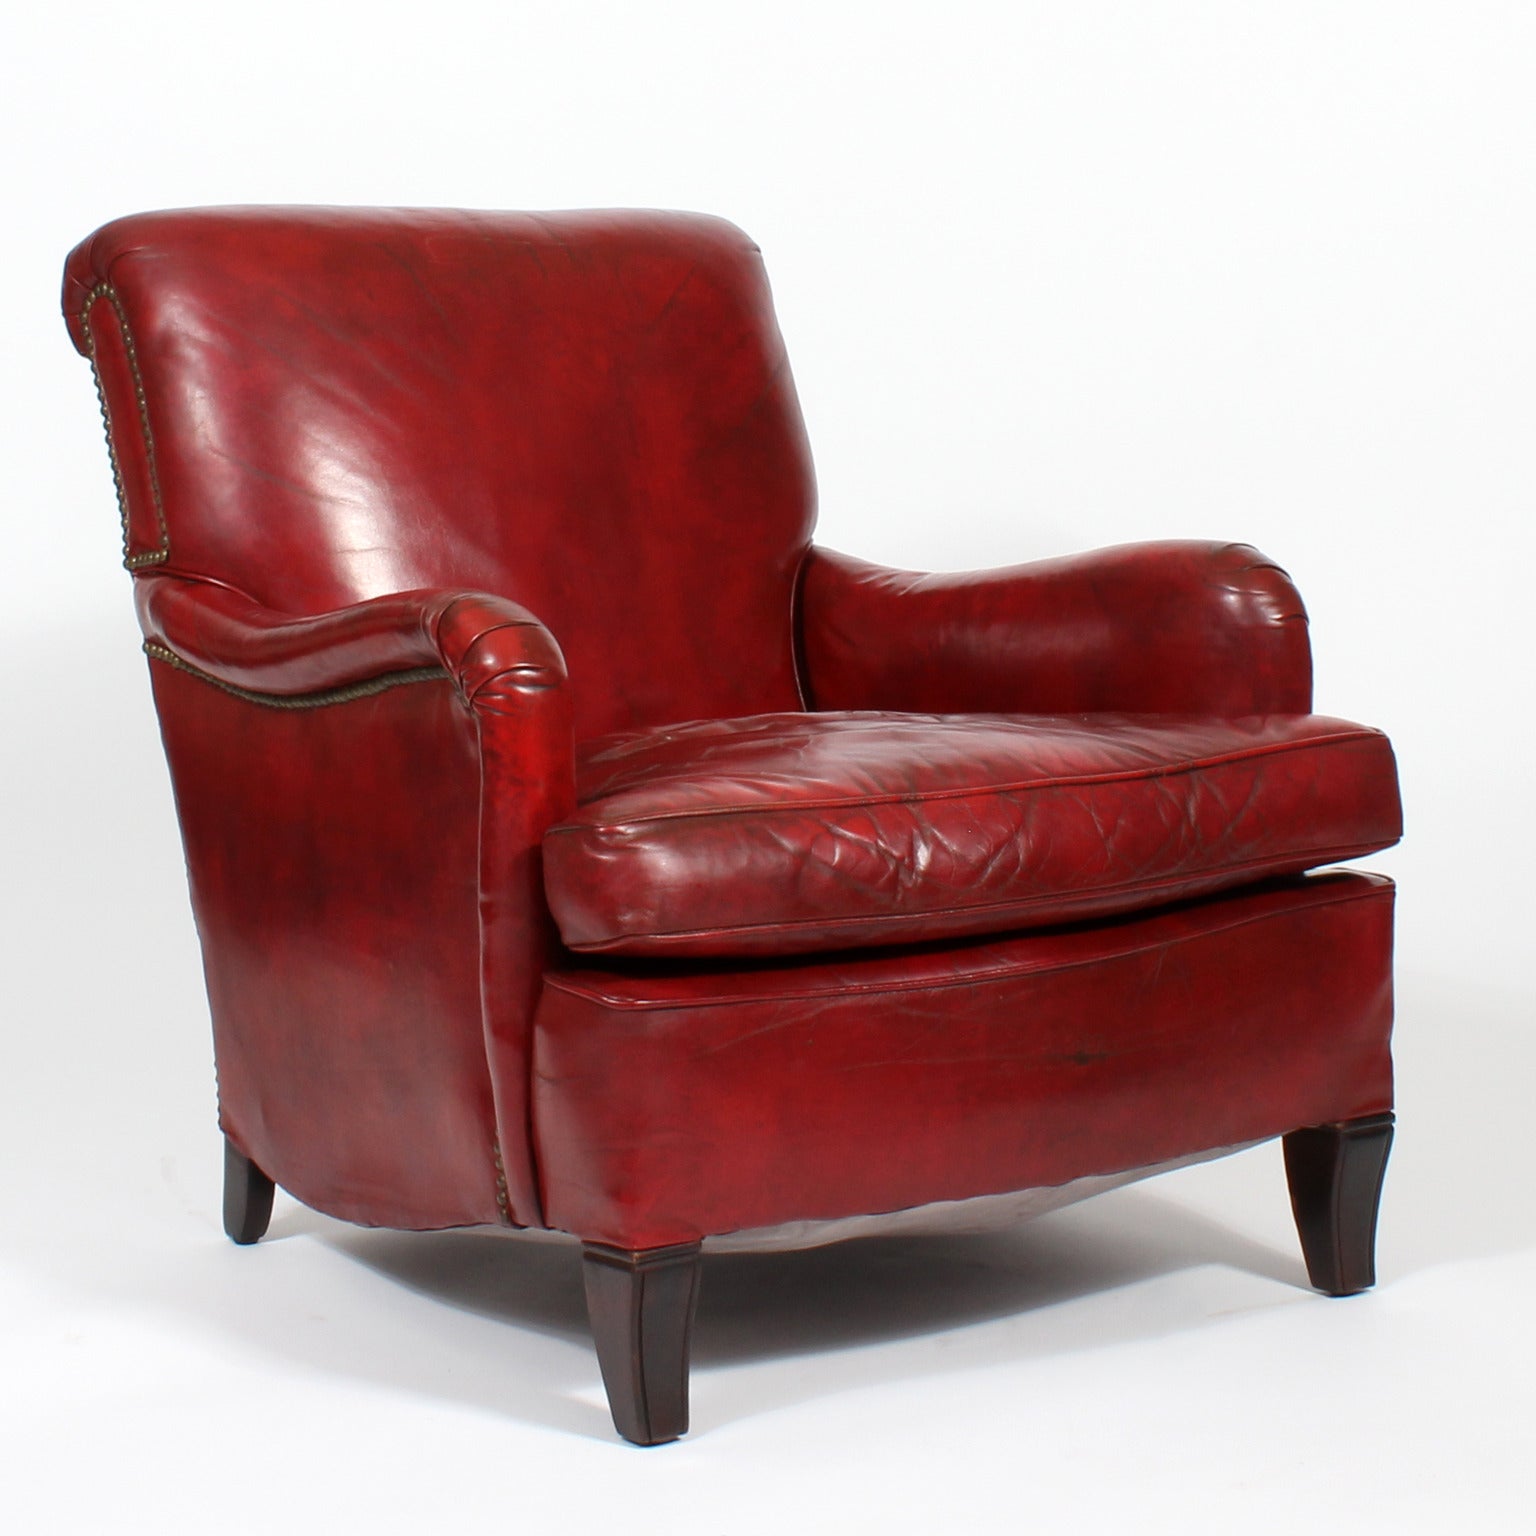 Comfy Vintage Red Leather Club or Armchair